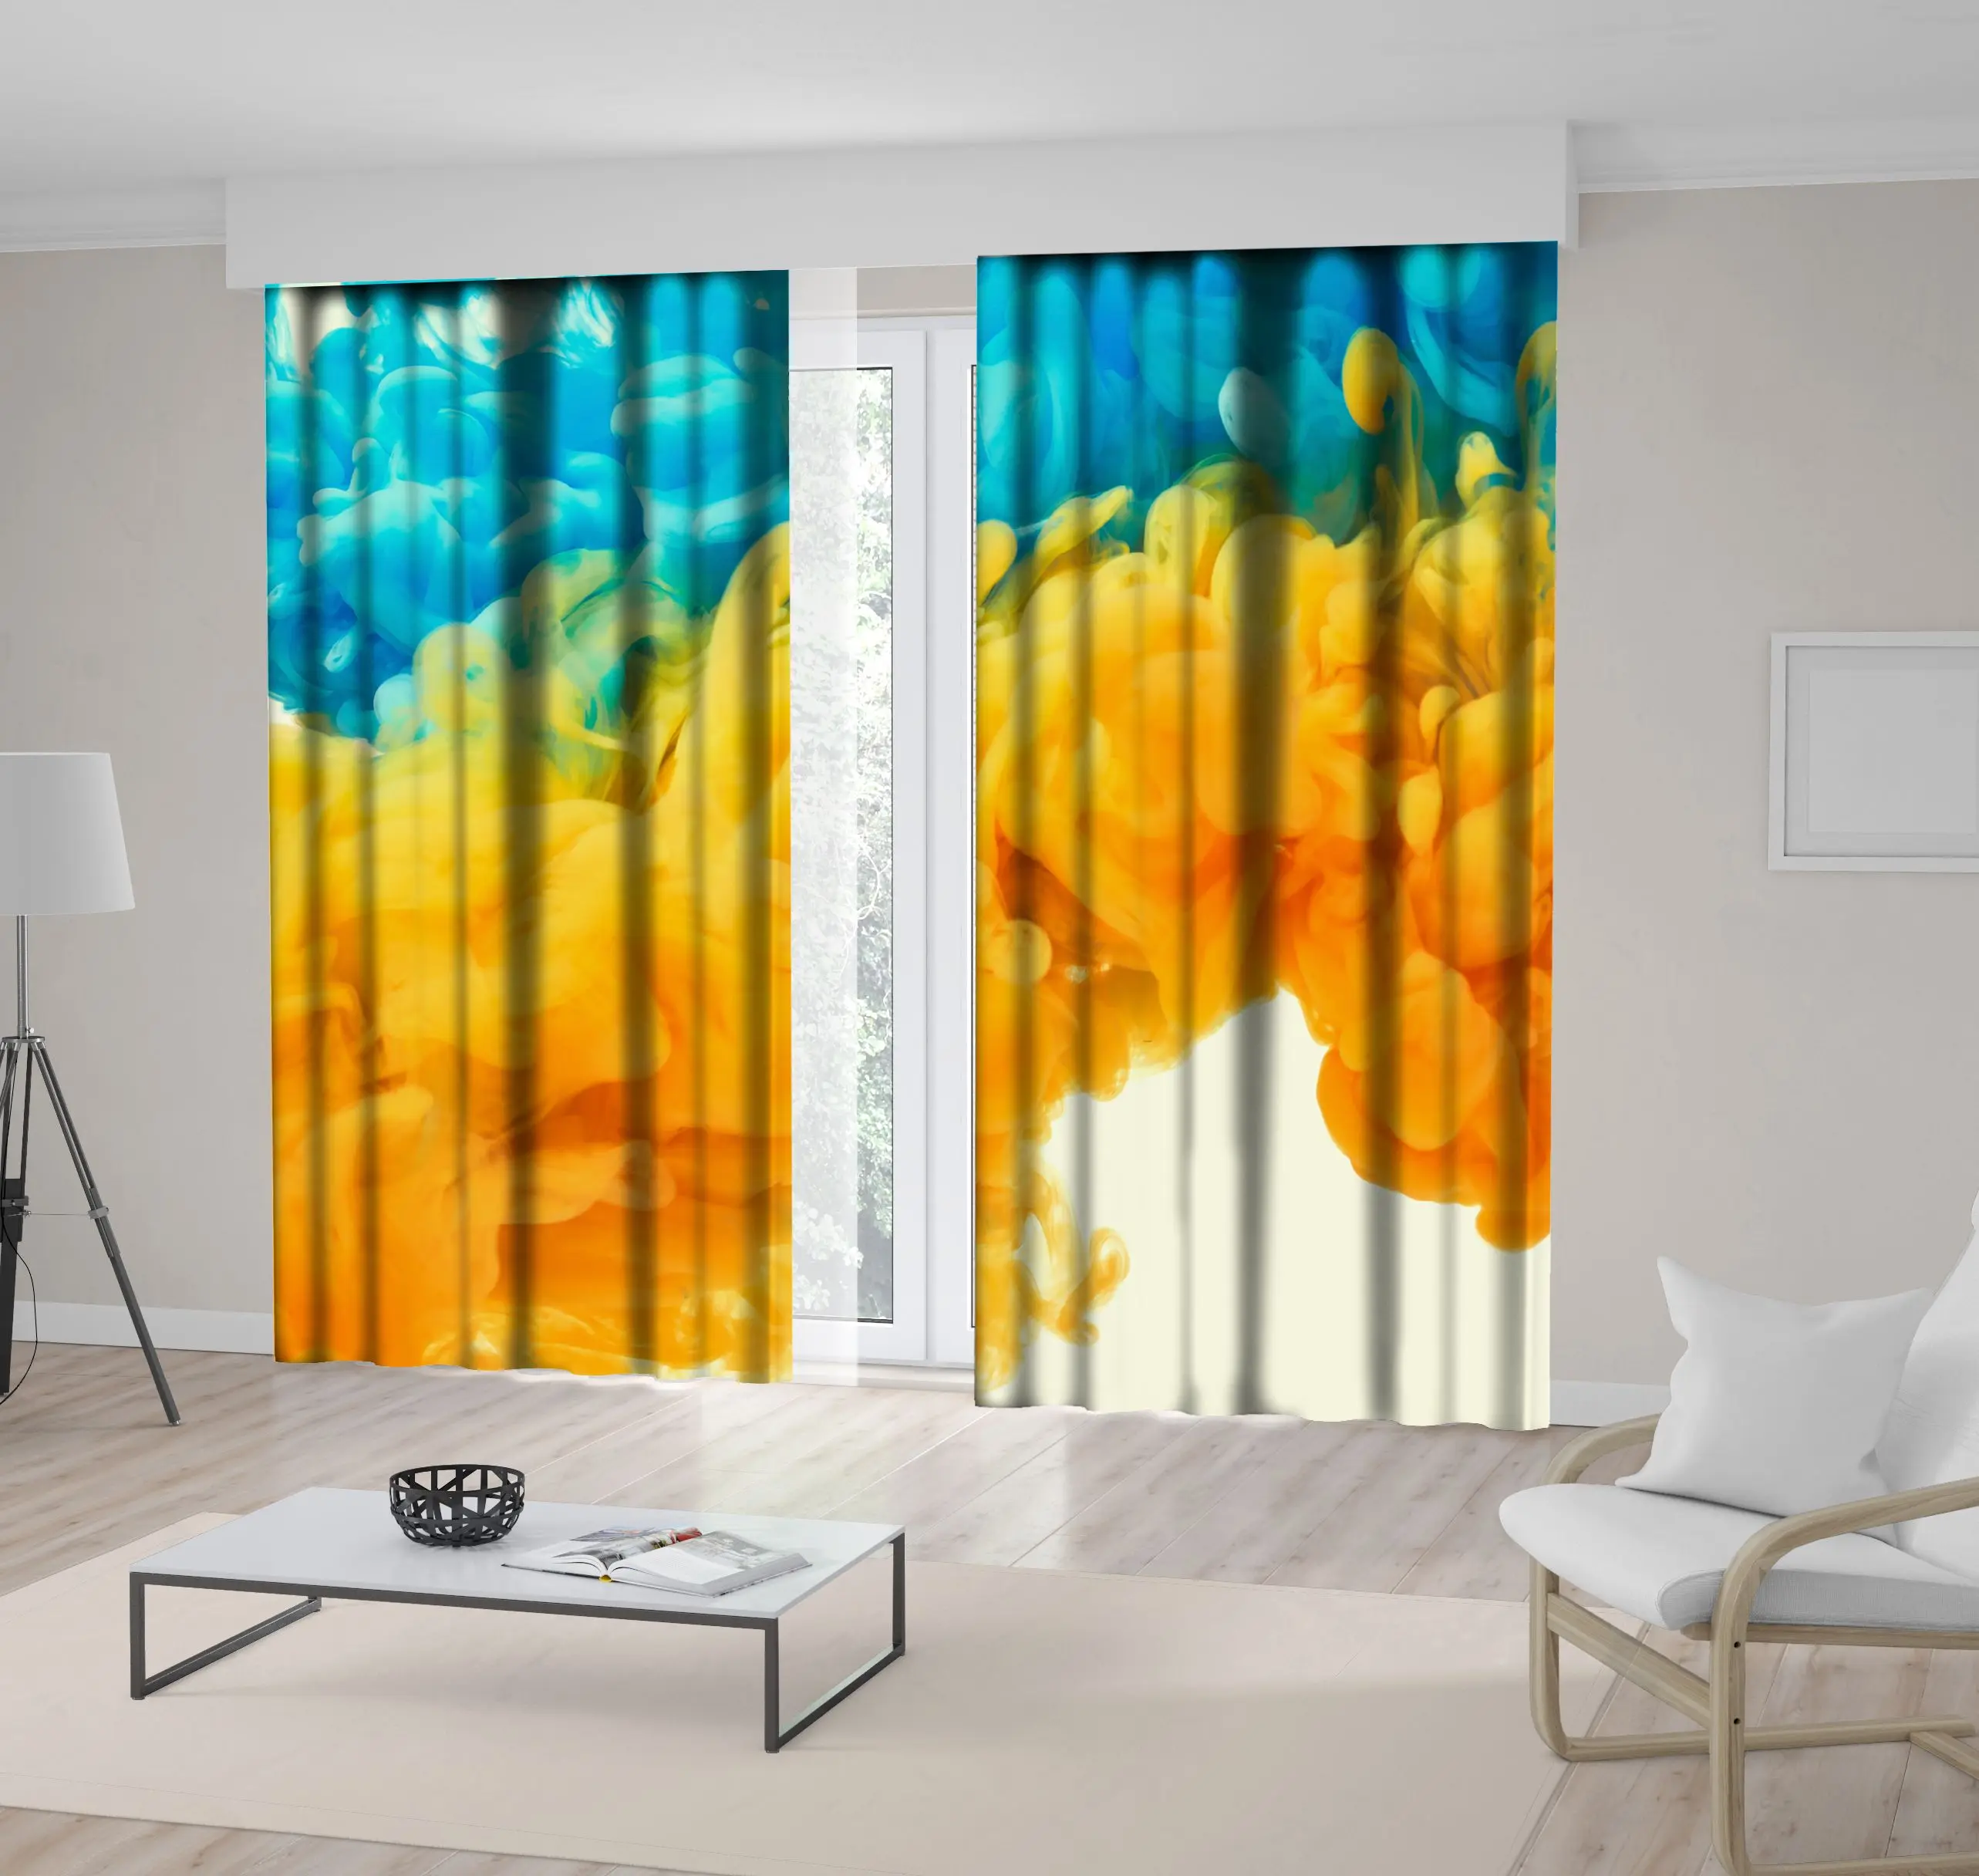 

Curtain Paint Ink in Flowing Water Bright Colors Liquid Dye Abstract Contemporary Artwork Blue Yellow